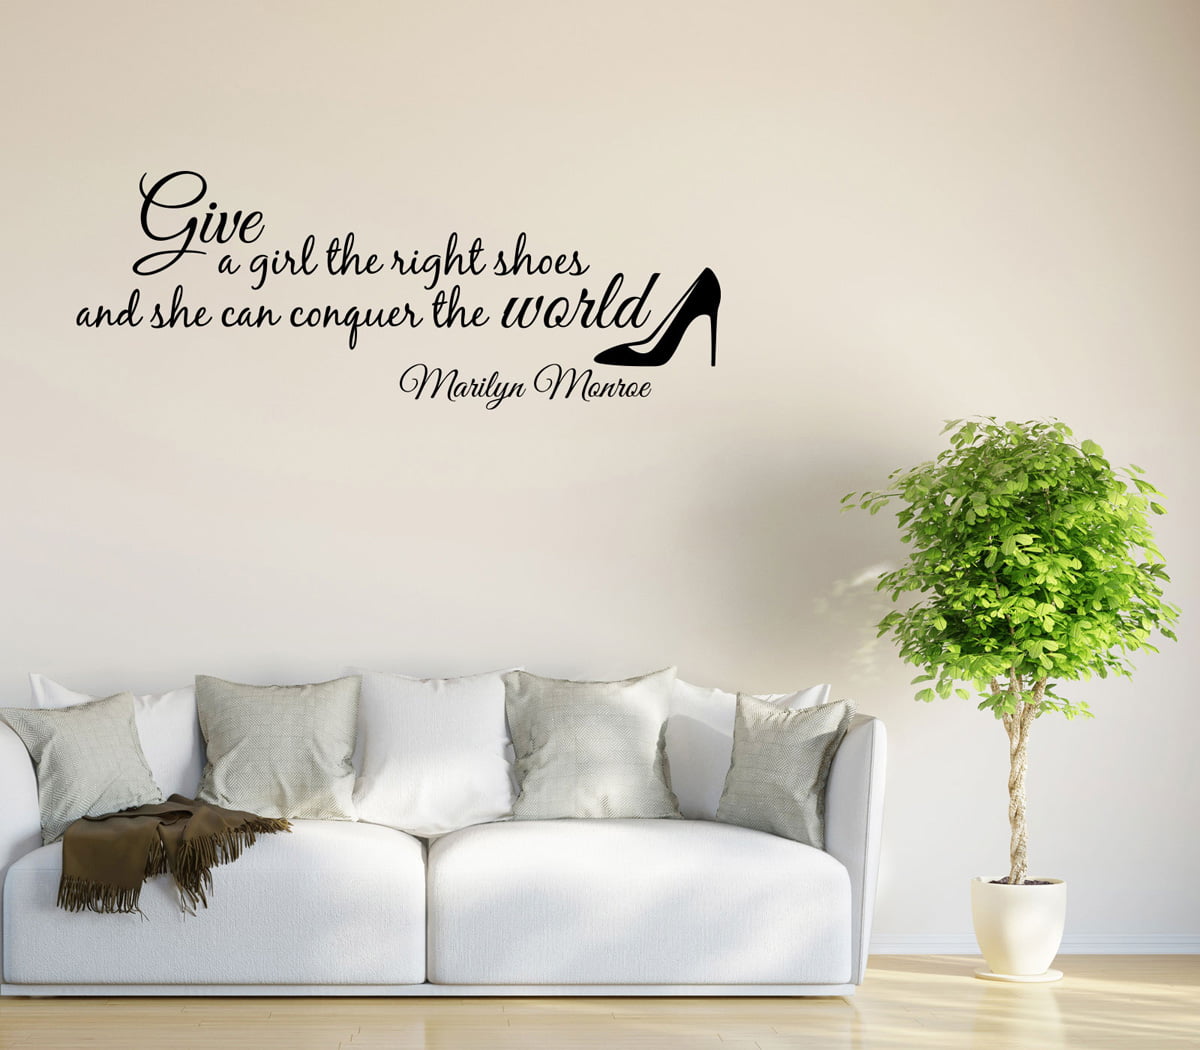 X Large 35 X 60 I Believe Vinyl Wall Decal Pick Your Size Marilyn Monroe Quote